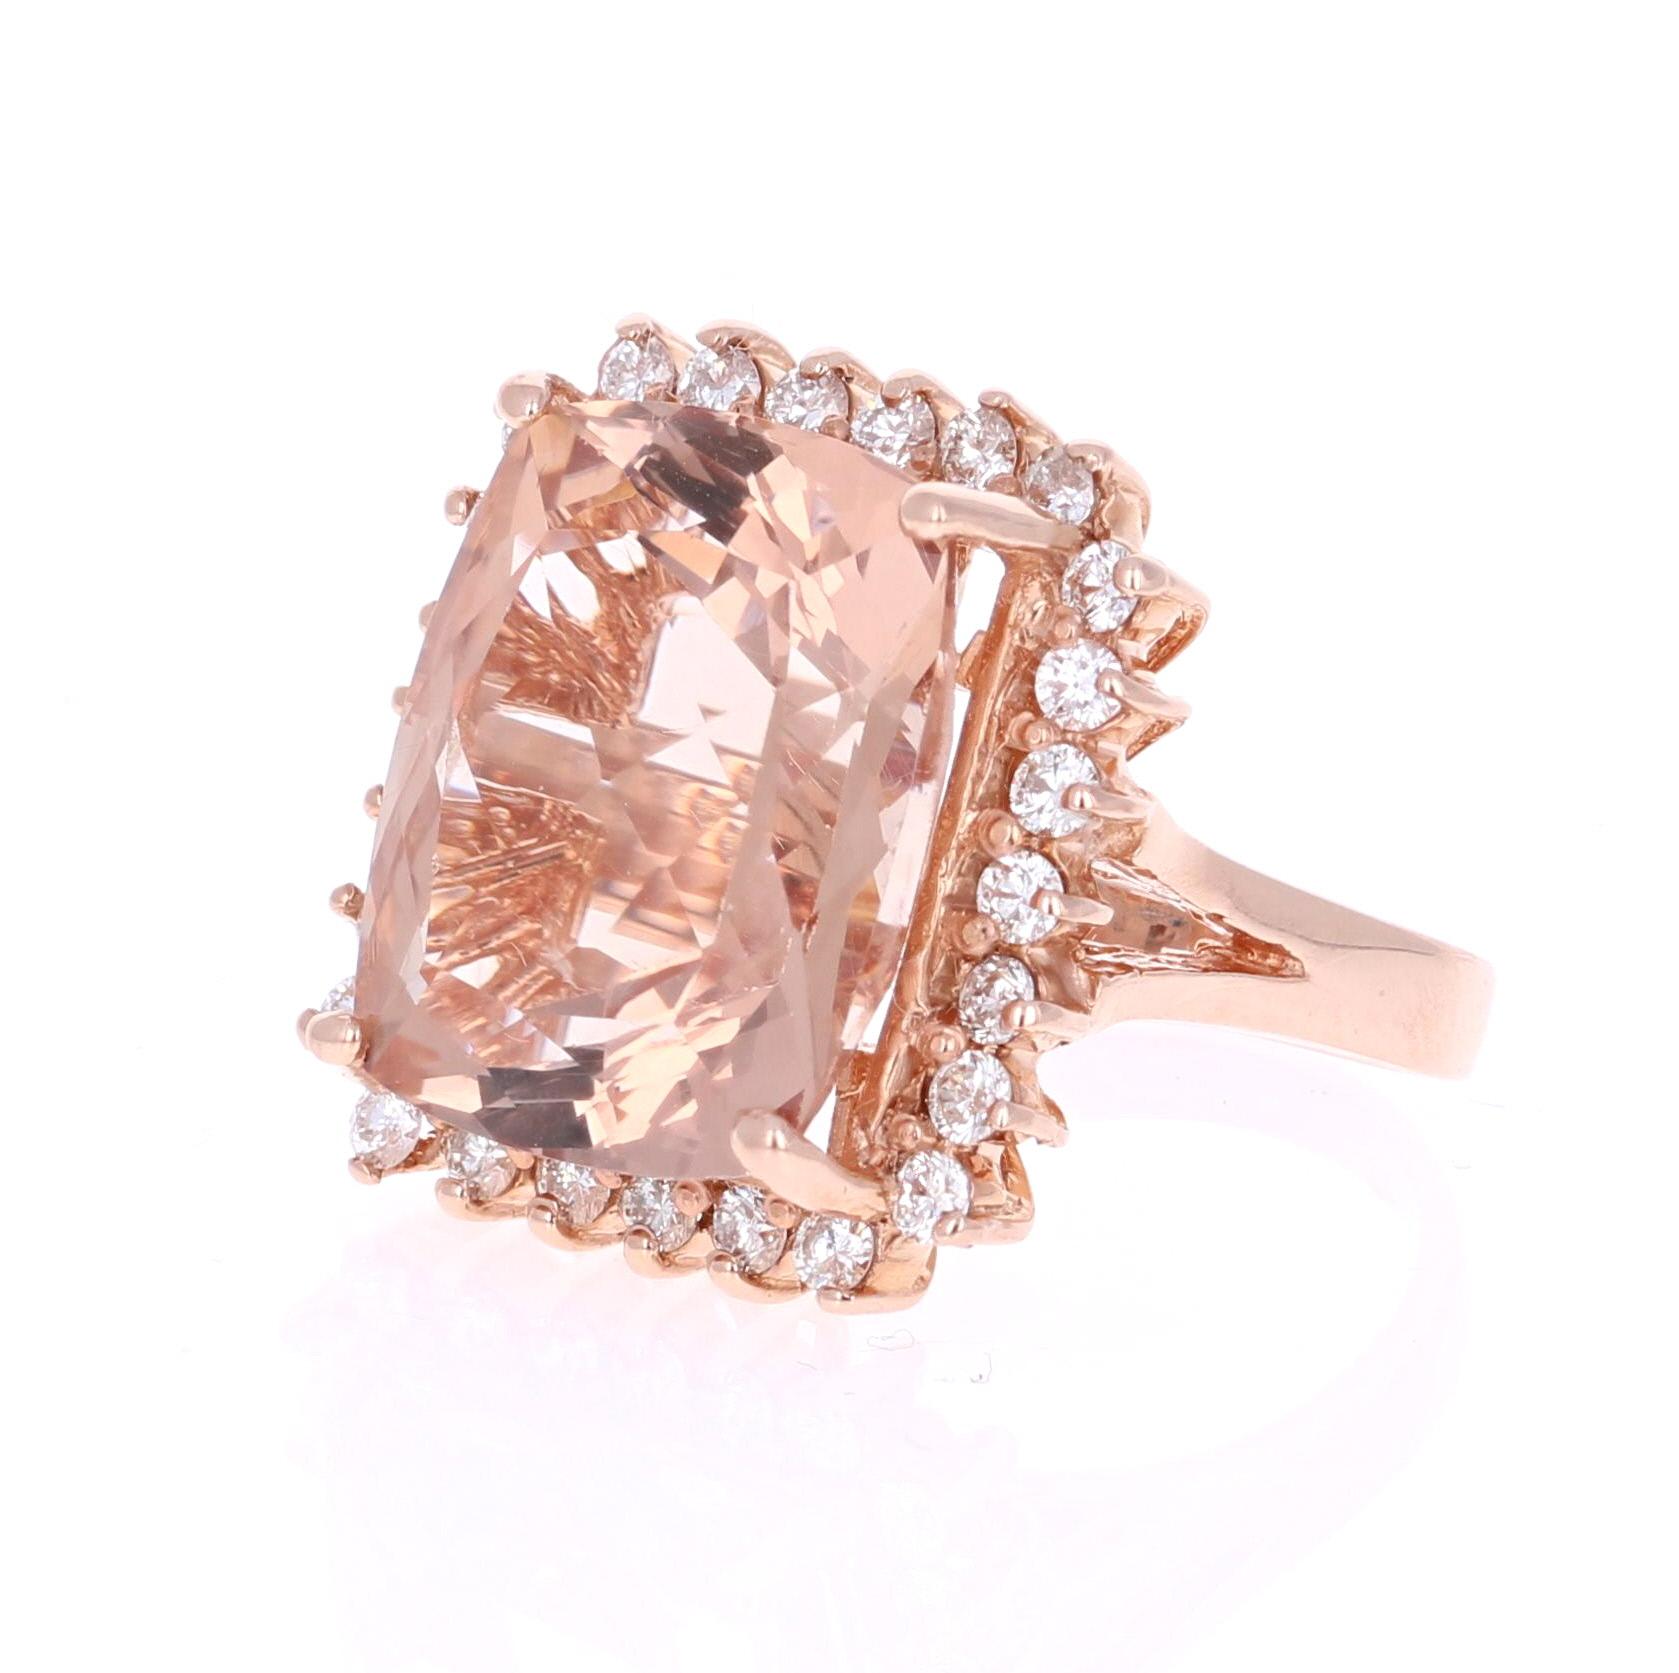 Statement Morganite Diamond Ring! 

This Morganite ring has a 15.16 Carat Cushion Cut Morganite and is surrounded by 26 Round Cut Diamonds that weigh 0.91 Carats.  The diamonds have a clarity and color of VS-H. The total carat weight of the ring is